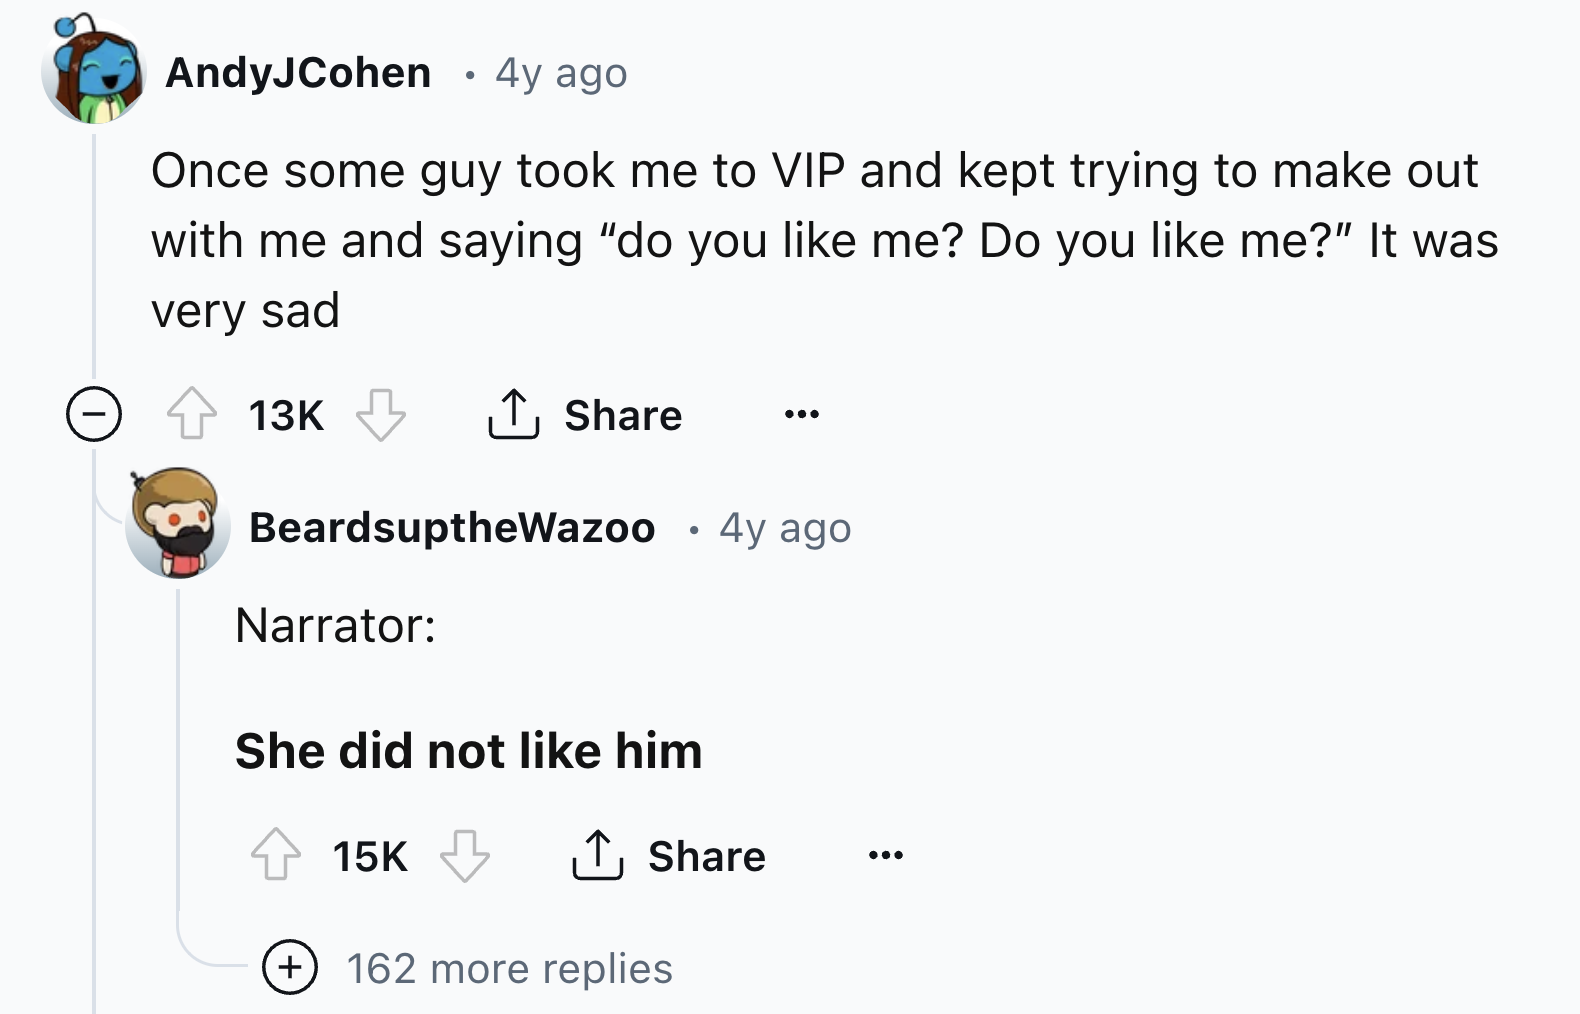 screenshot - AndyJCohen 4y ago Once some guy took me to Vip and kept trying to make out with me and saying "do you me? Do you me?" It was very sad 13K 4y ago BeardsuptheWazoo Narrator She did not him 15K 162 more replies